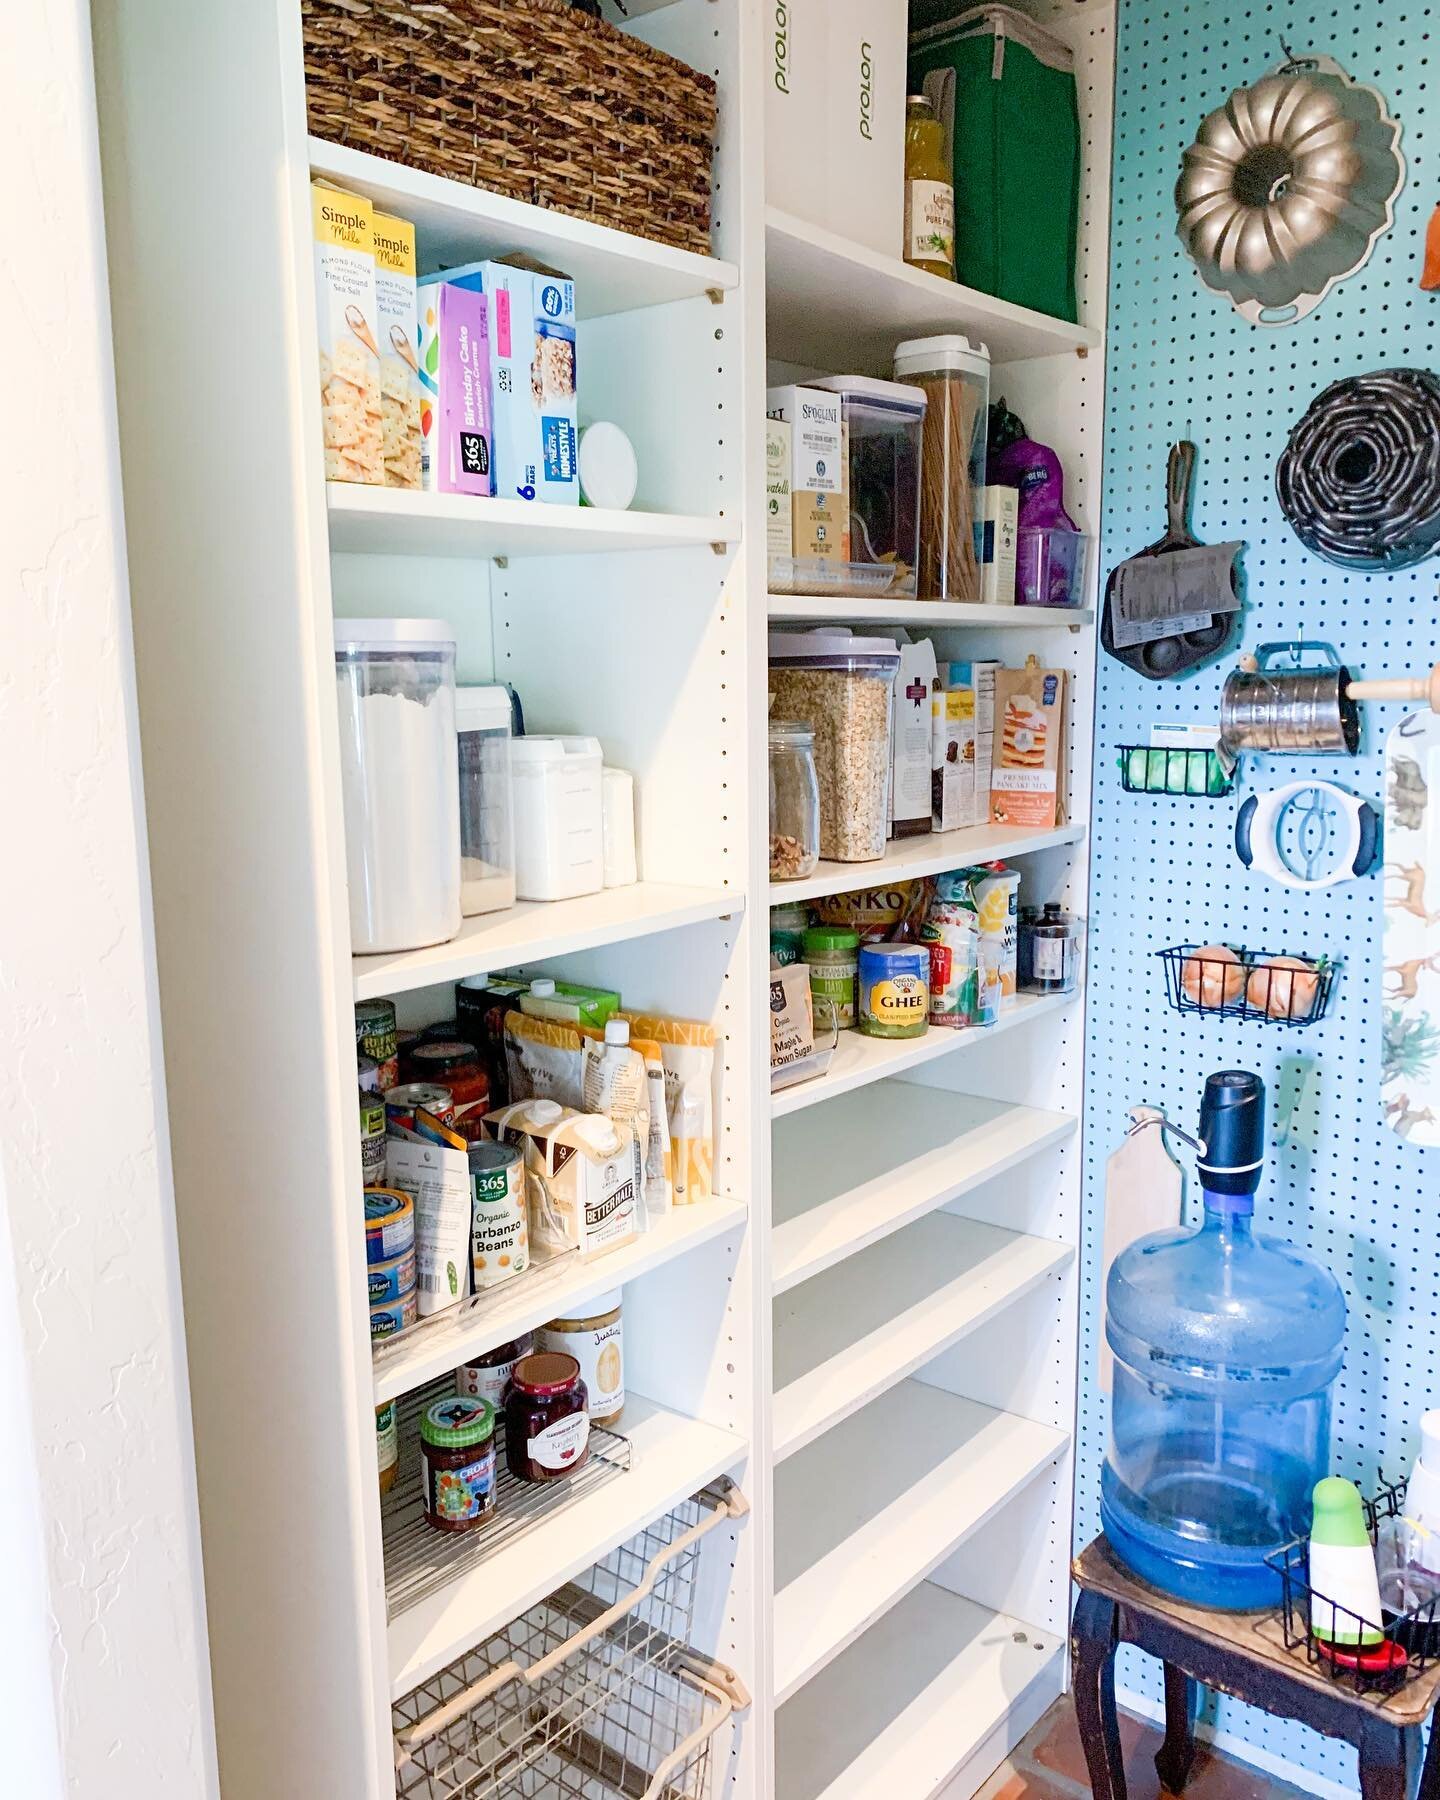 Yes, I&rsquo;m still here. Here&rsquo;s a recent pantry After // Before. Just because you have the space it doesn&rsquo;t mean you need to use it all. Enjoy!